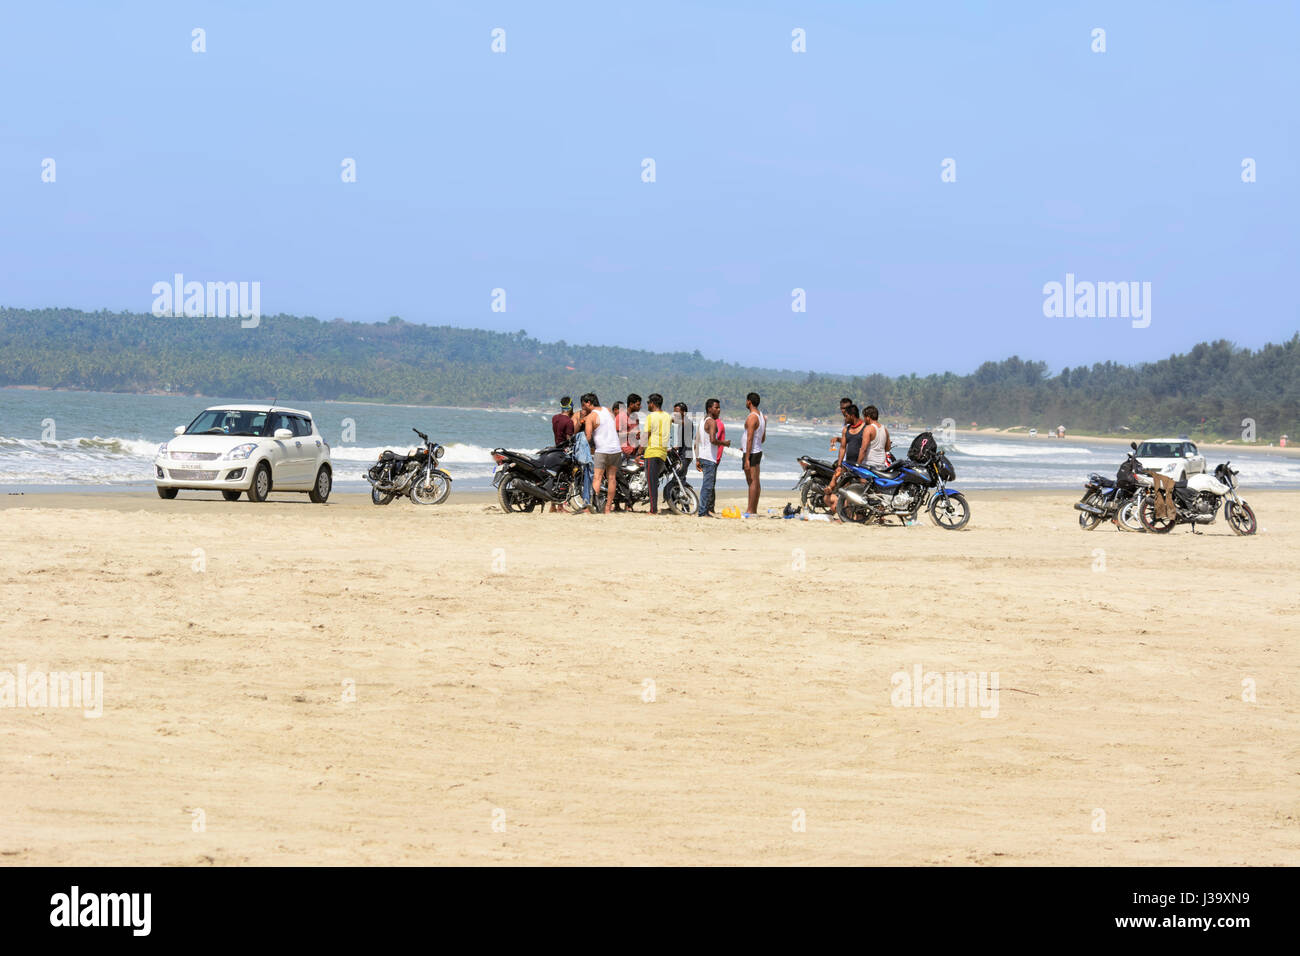 Motorbike riders on Muzhappilangad beach, Kerala’s only drive-in beach, Kannur Cannanore), Kerala, South India, South Asia. Stock Photo